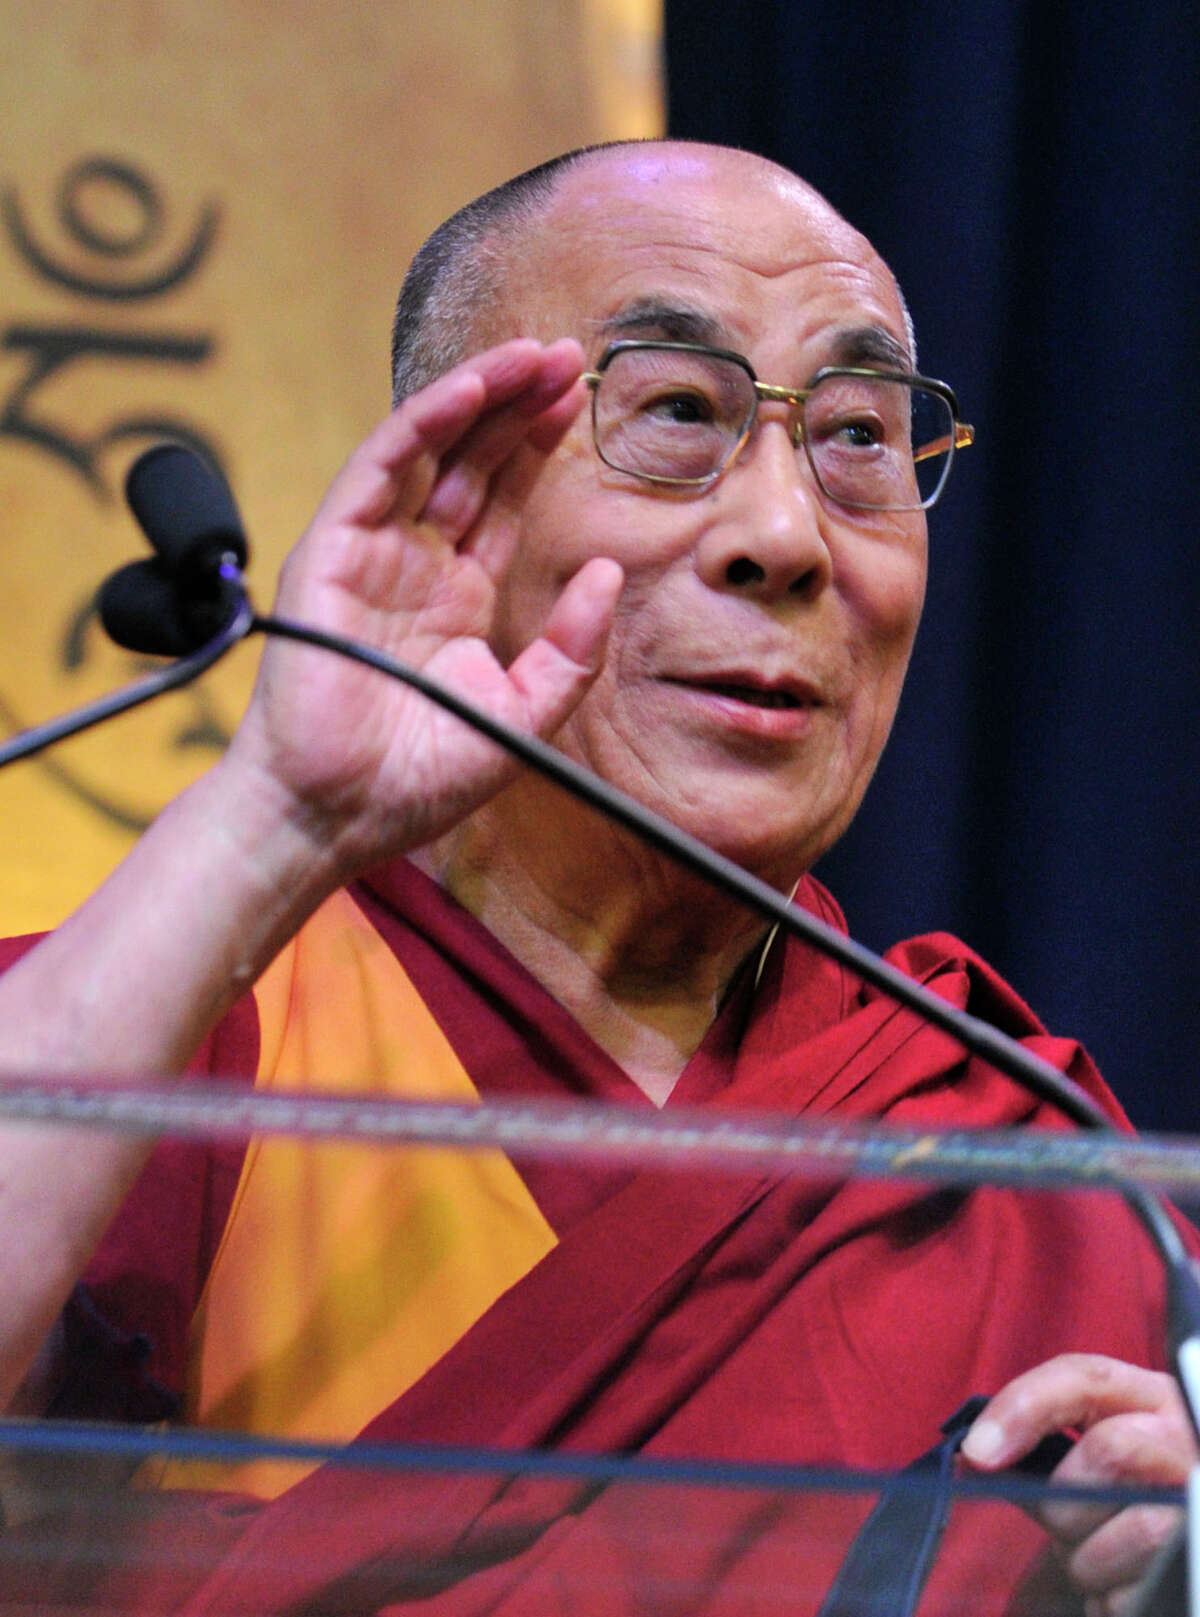 The Dalai Lama speaks to a crowd at the O'Neill Center on Western Connecticut State University's west side campus during his "The Art of Compassion" speech in Danbury on Thursday, Oct. 18, 2012.